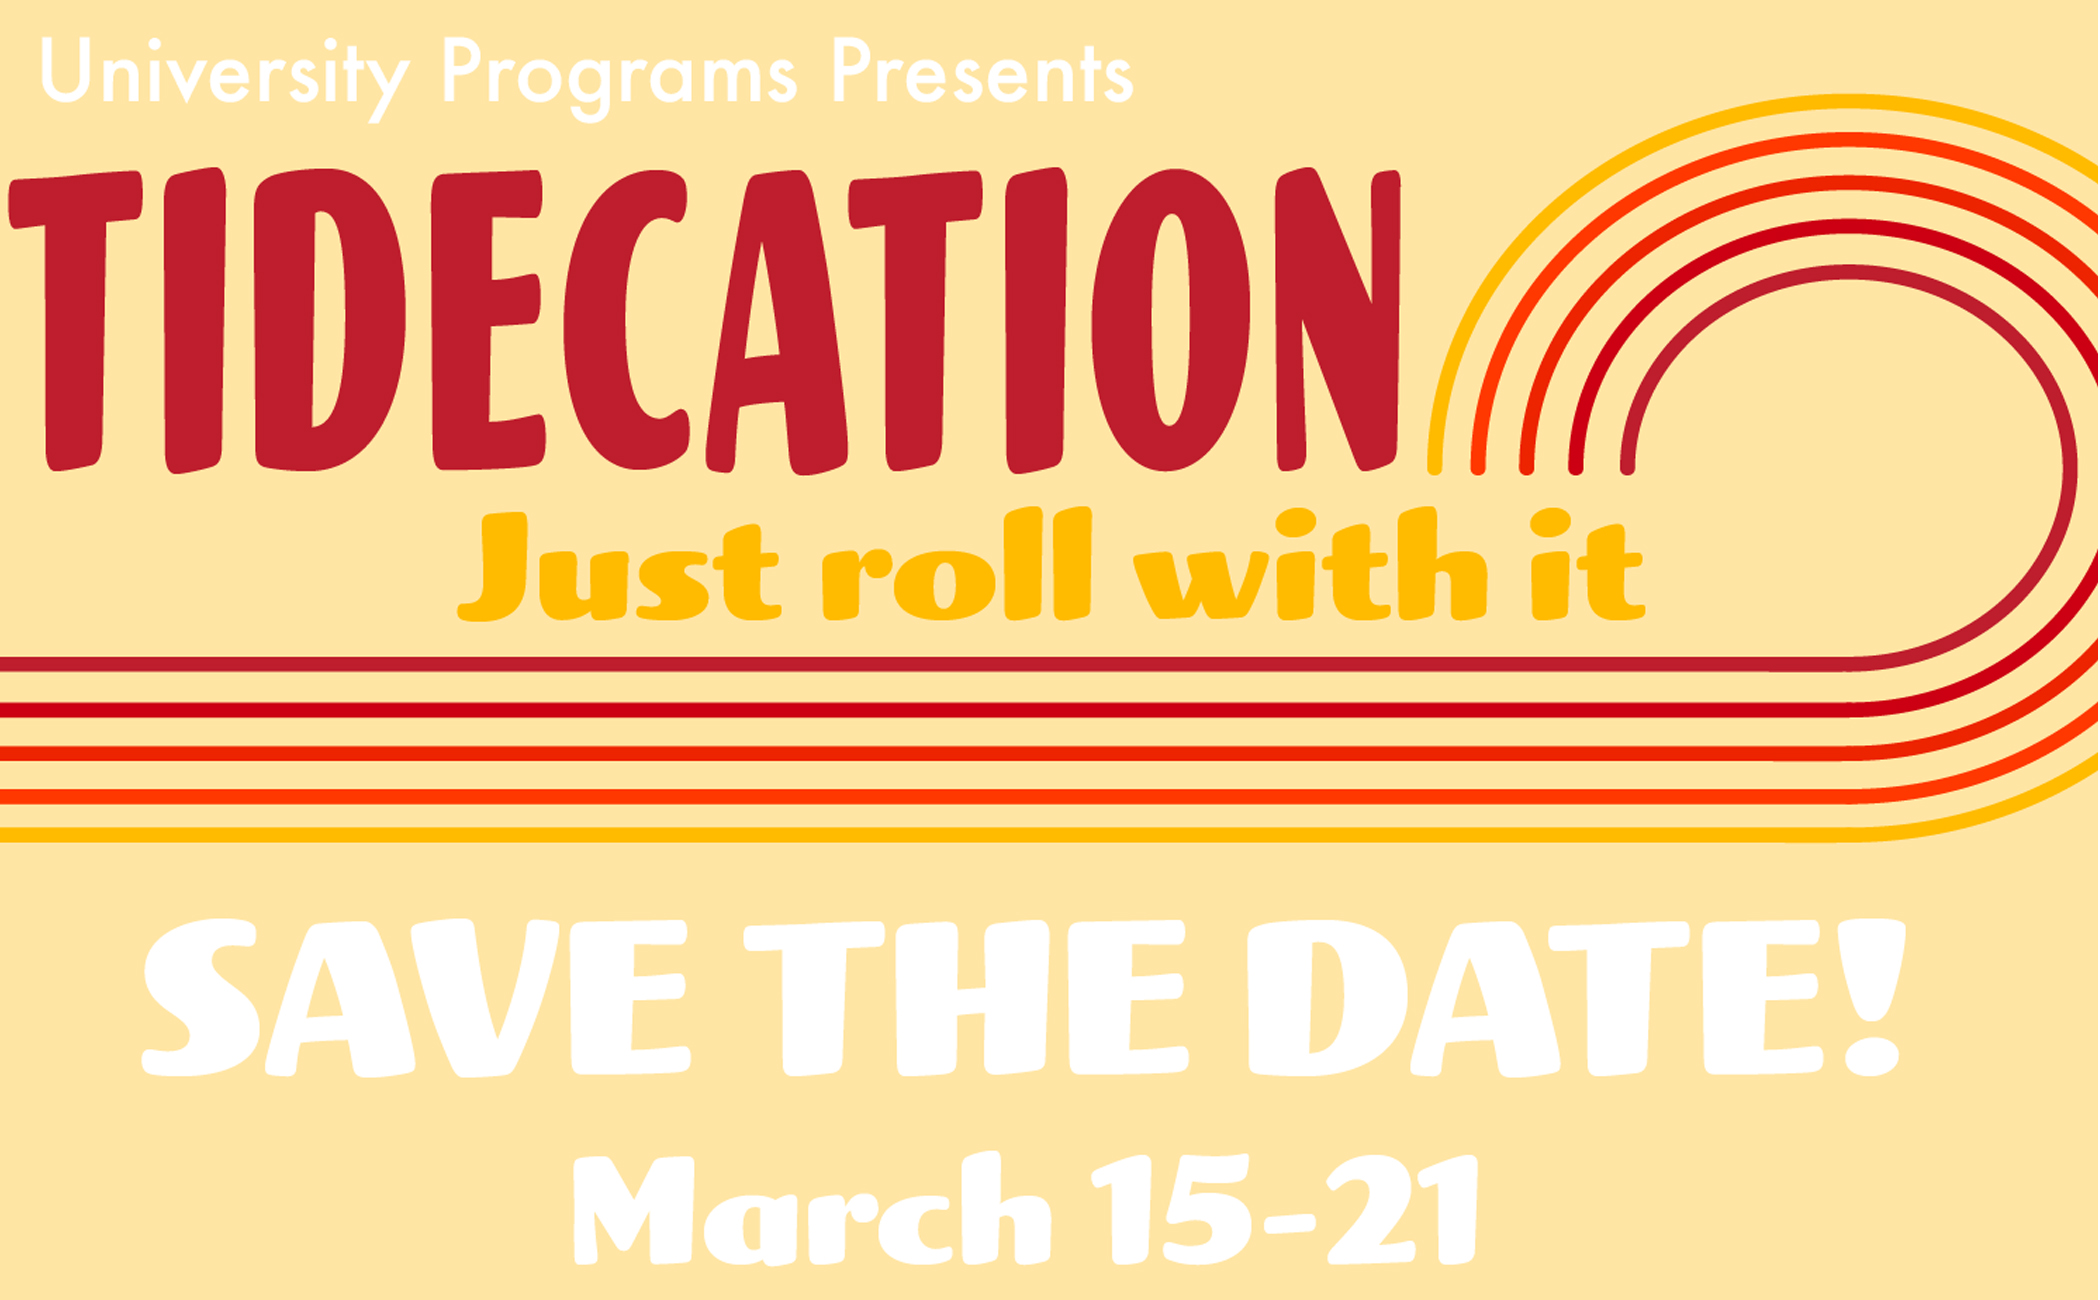 Tidecation Offers Students Free On-Campus Fun This Week